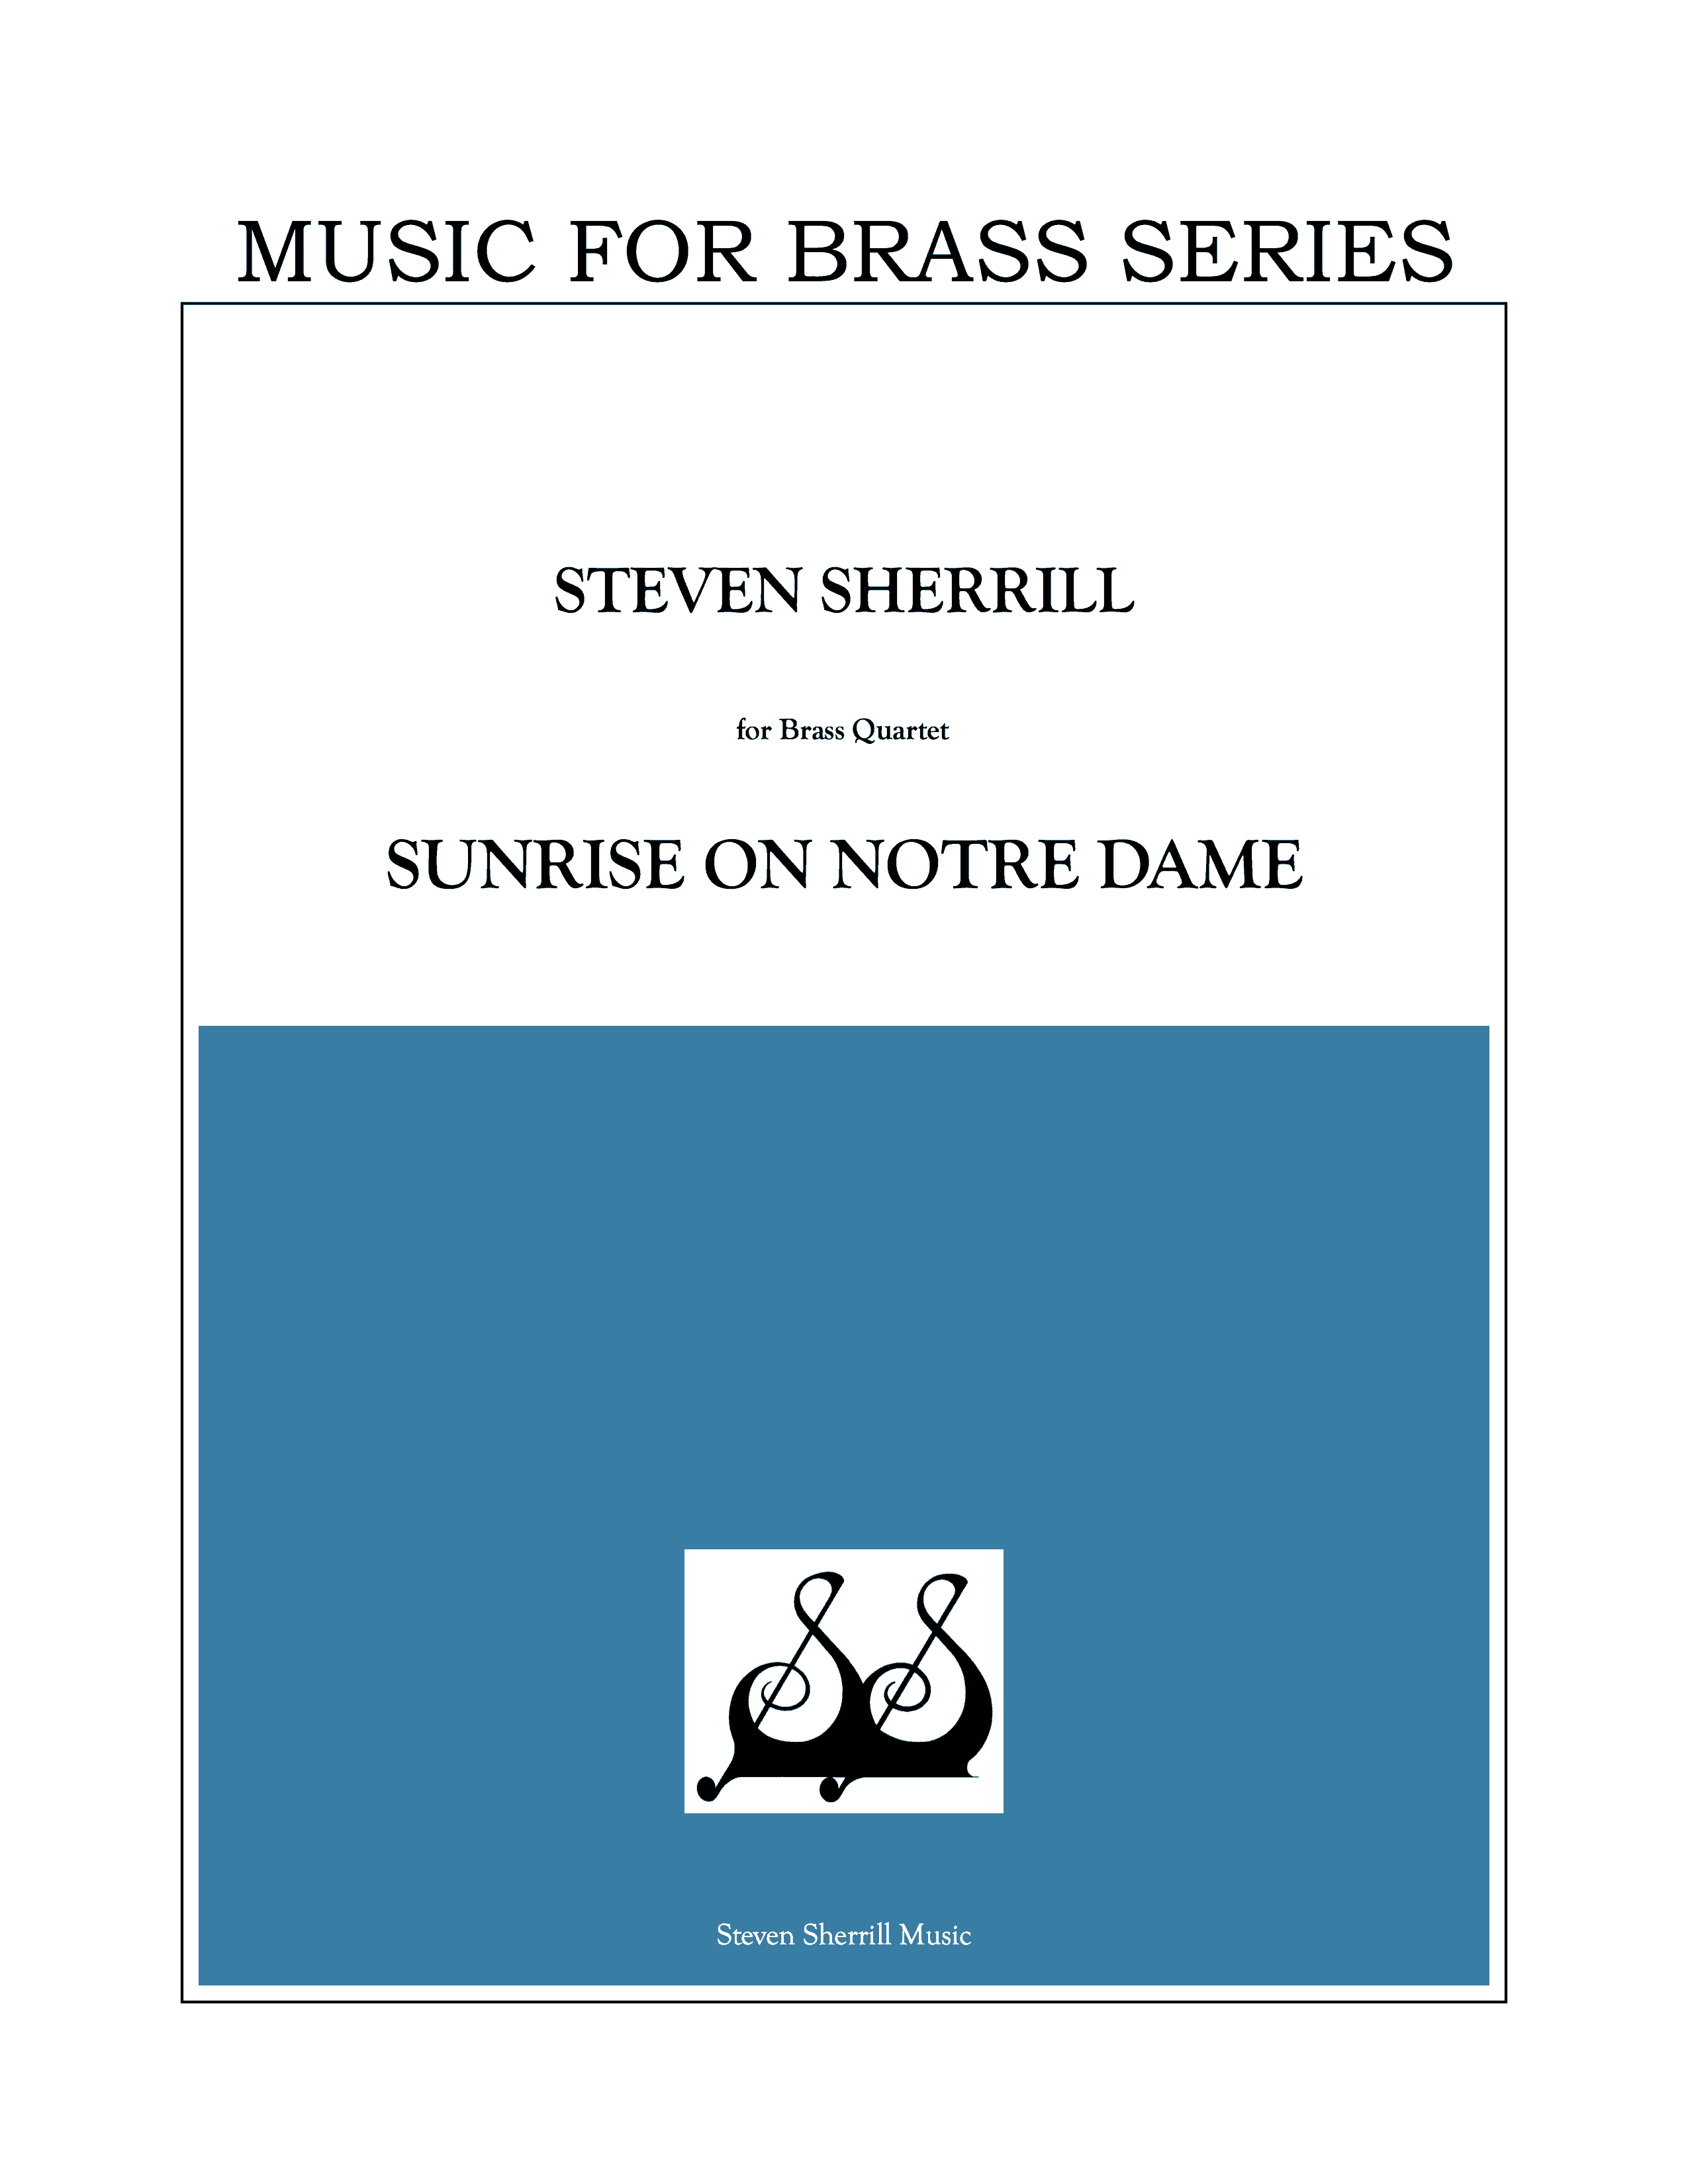 Sunrise on Notre Dame cover page